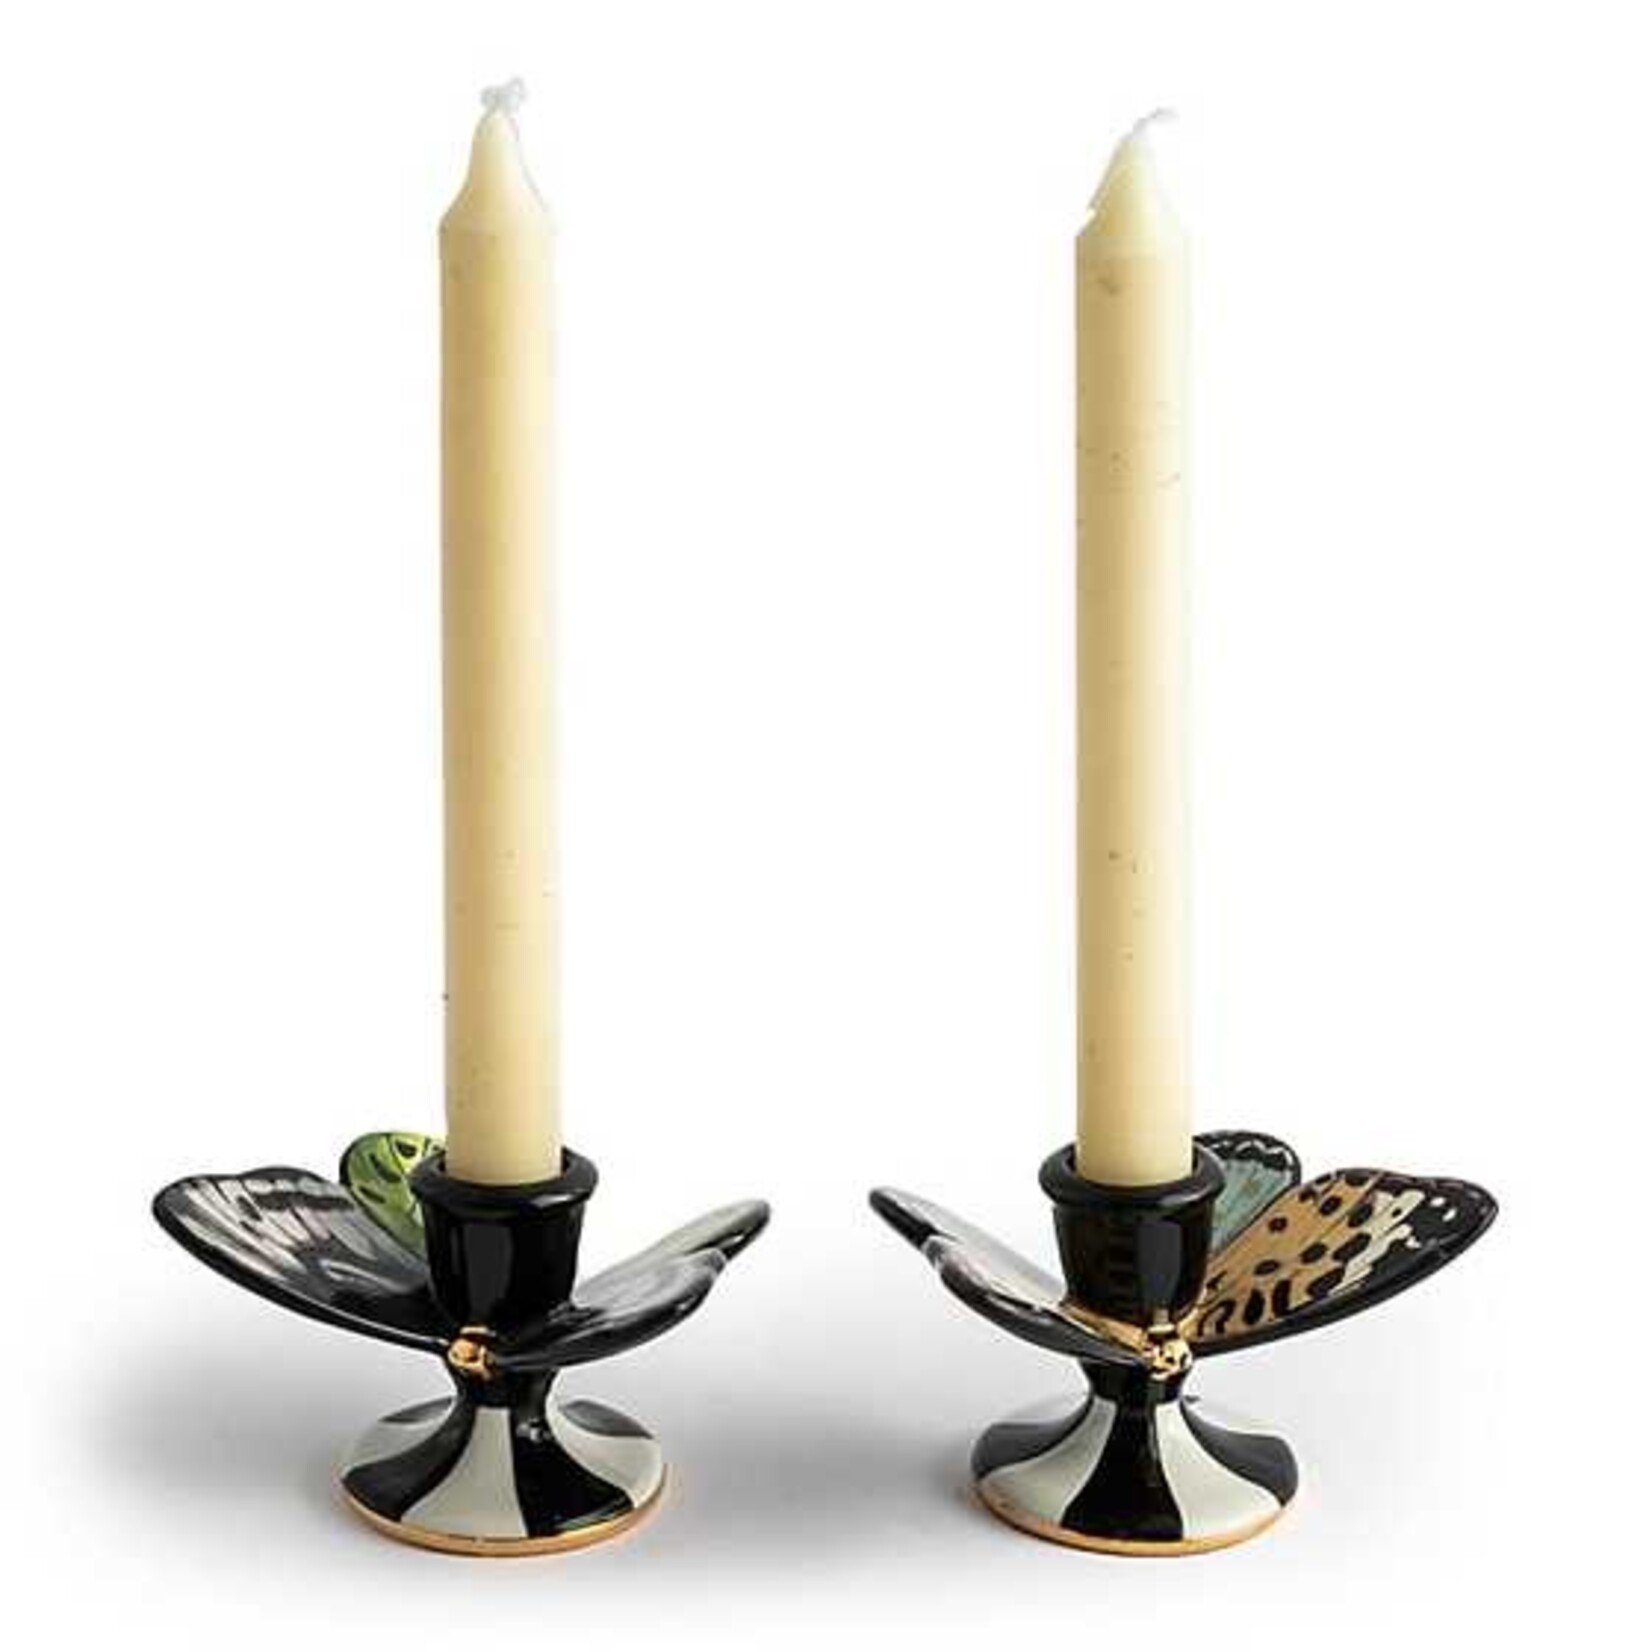 MacKenzie-Childs Butterfly Toile Candle Holders - Set of 2